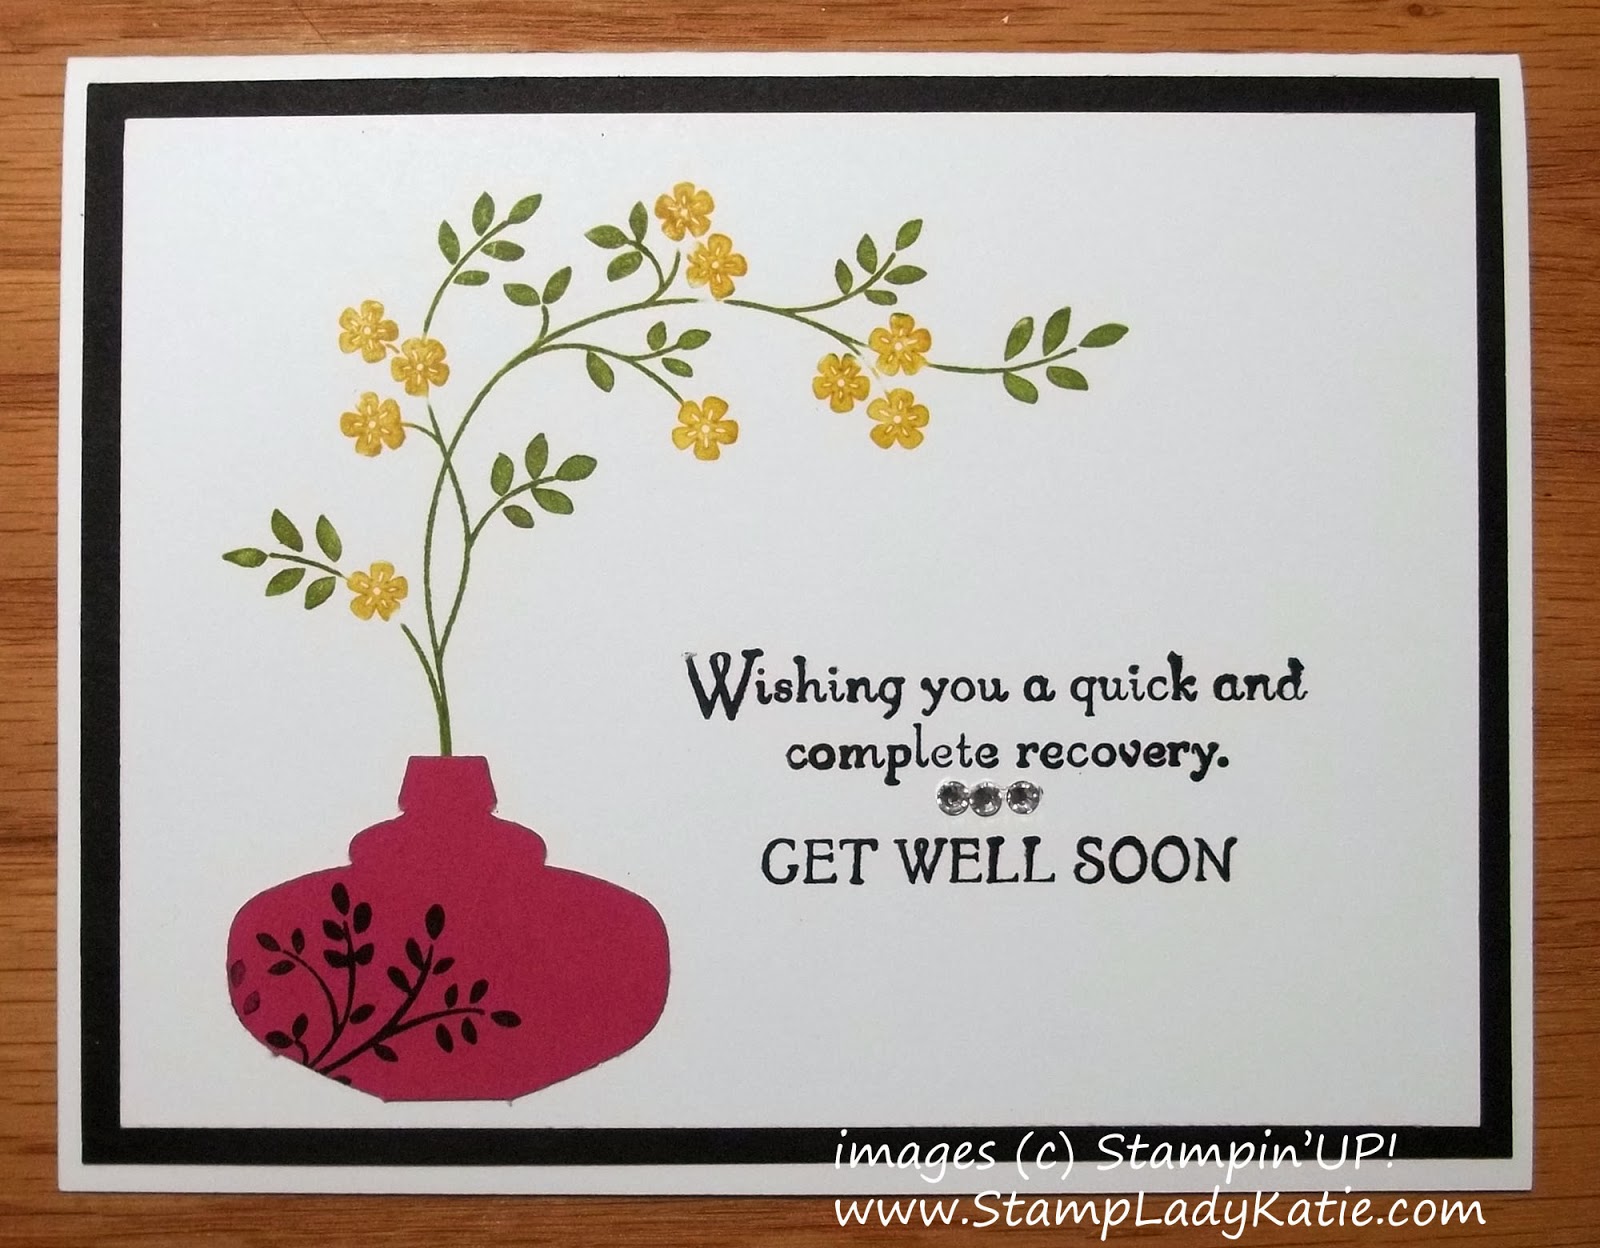 Punch art vase on a get well card made with Stampin'UP!'s Thoughts and Prayers stamp set and ornament punch